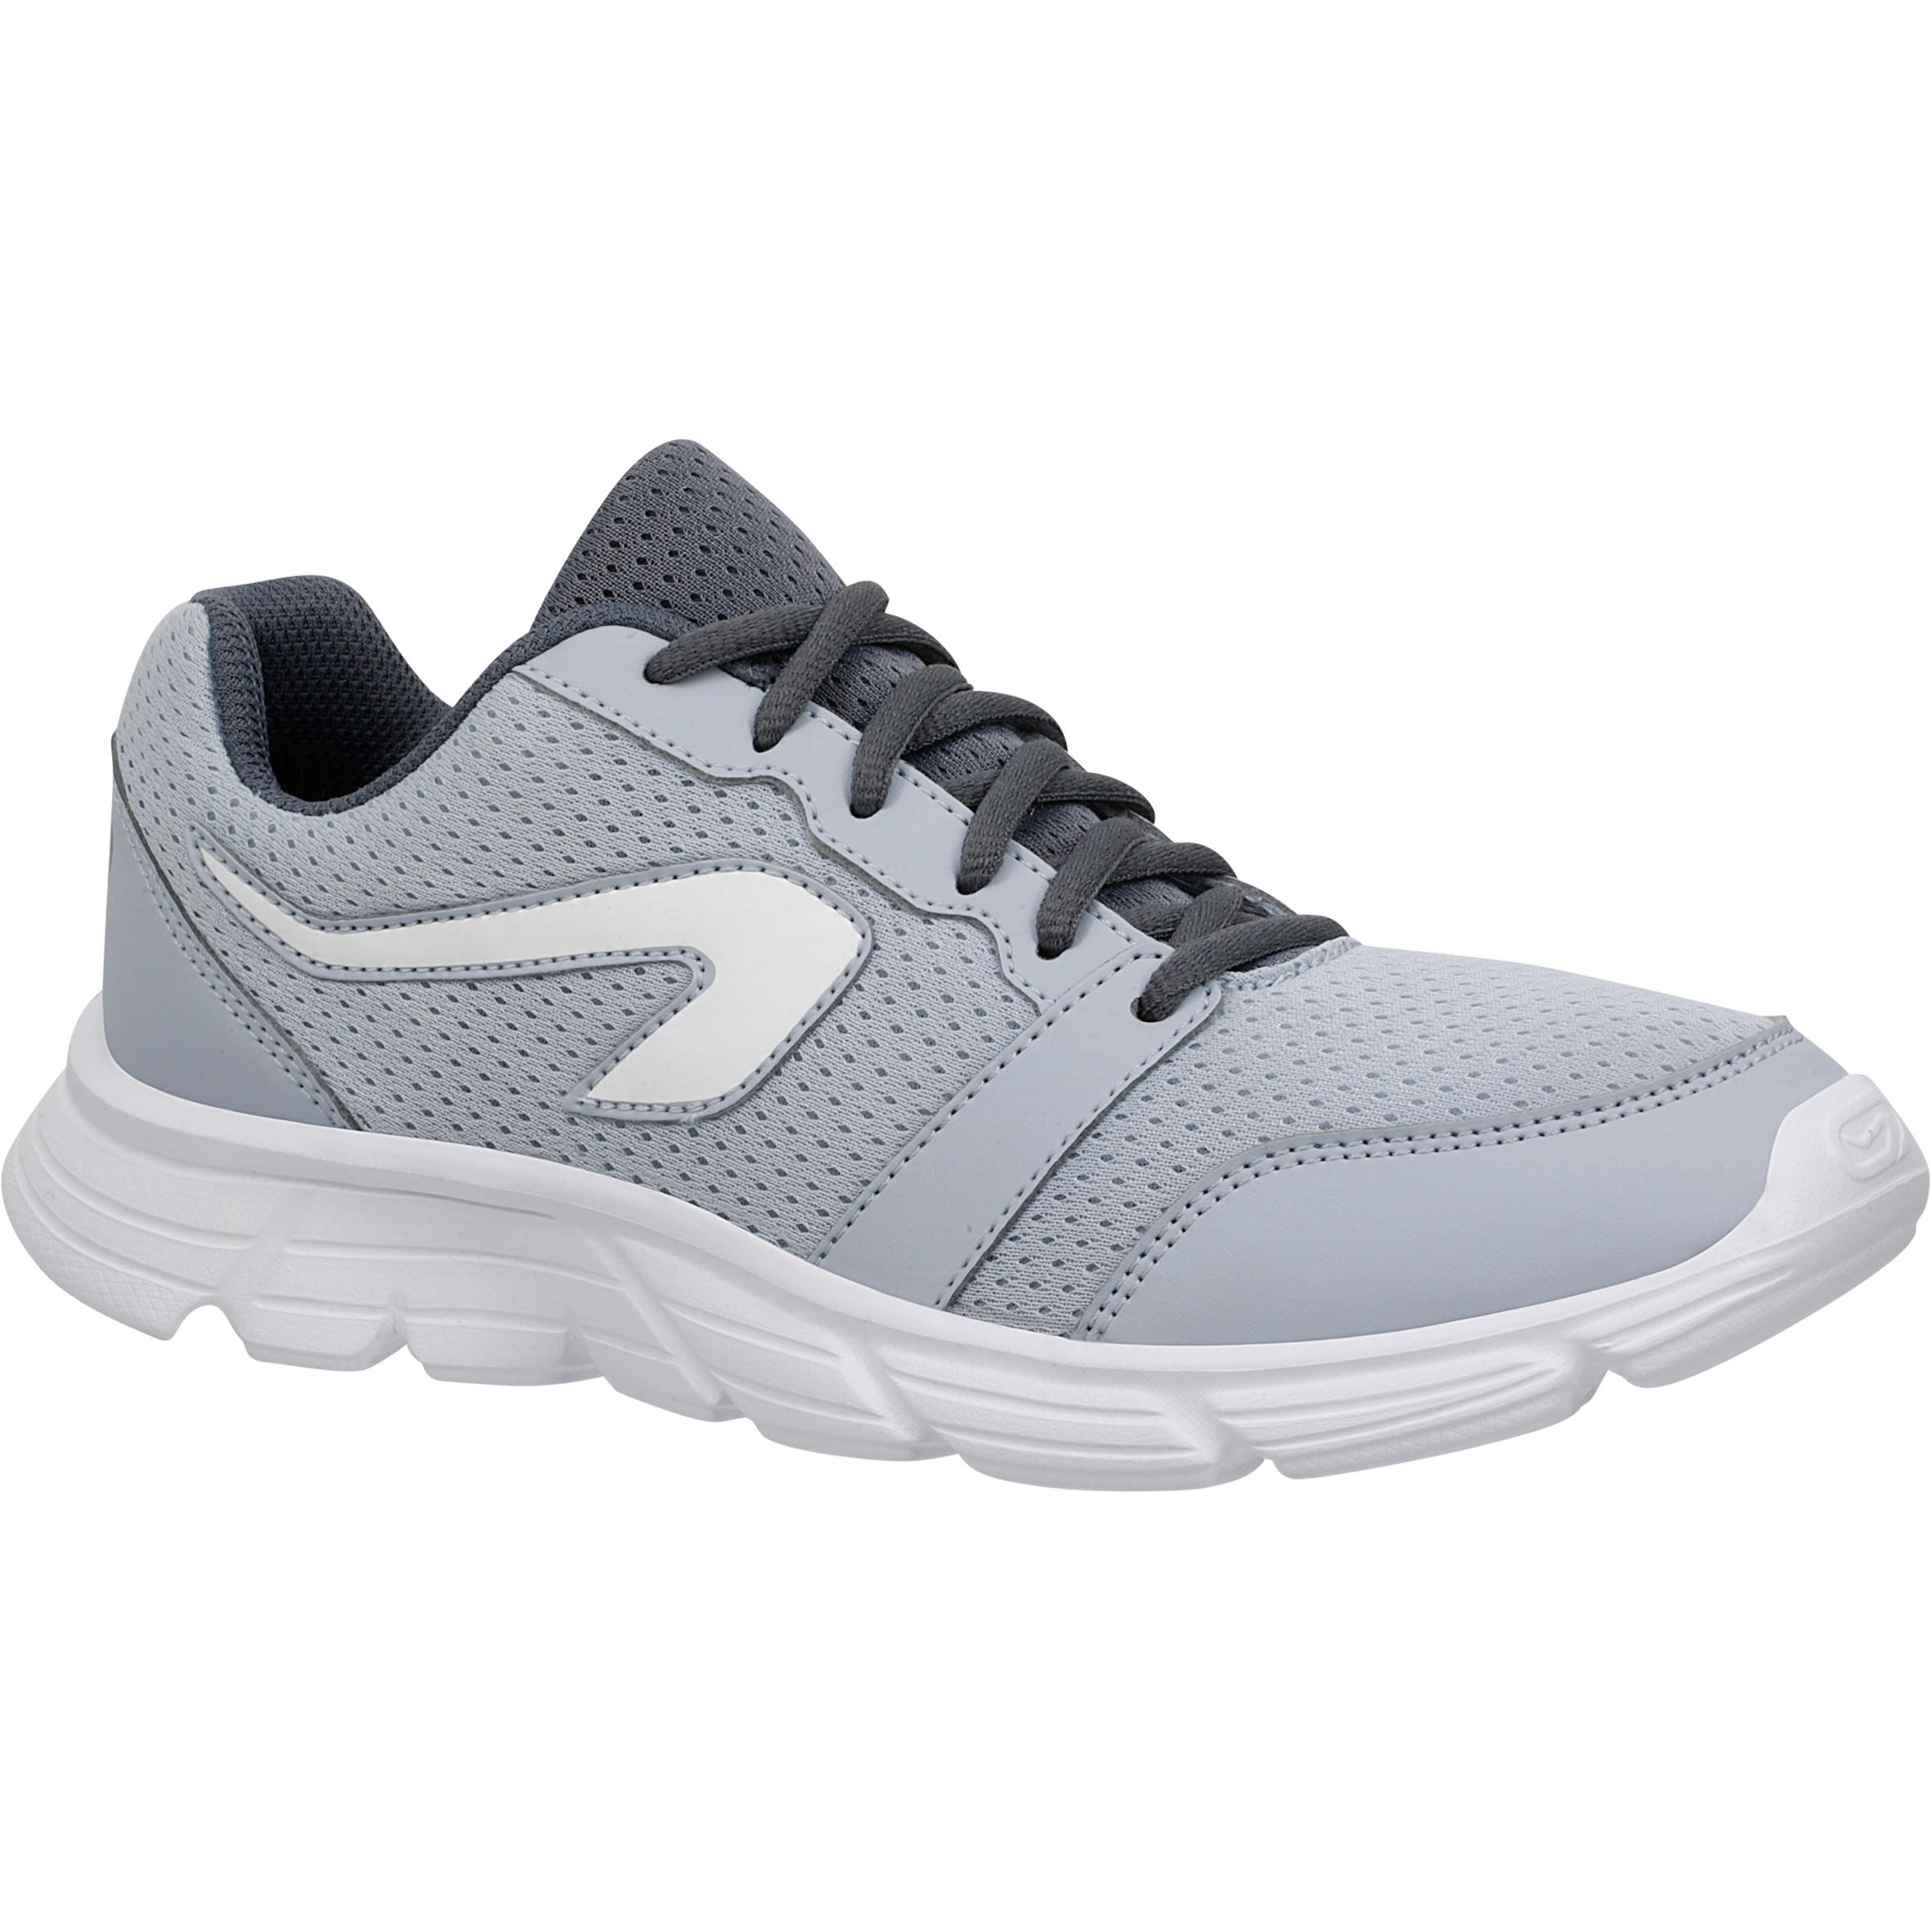 Trainers \u0026 Running Shoes for Women 